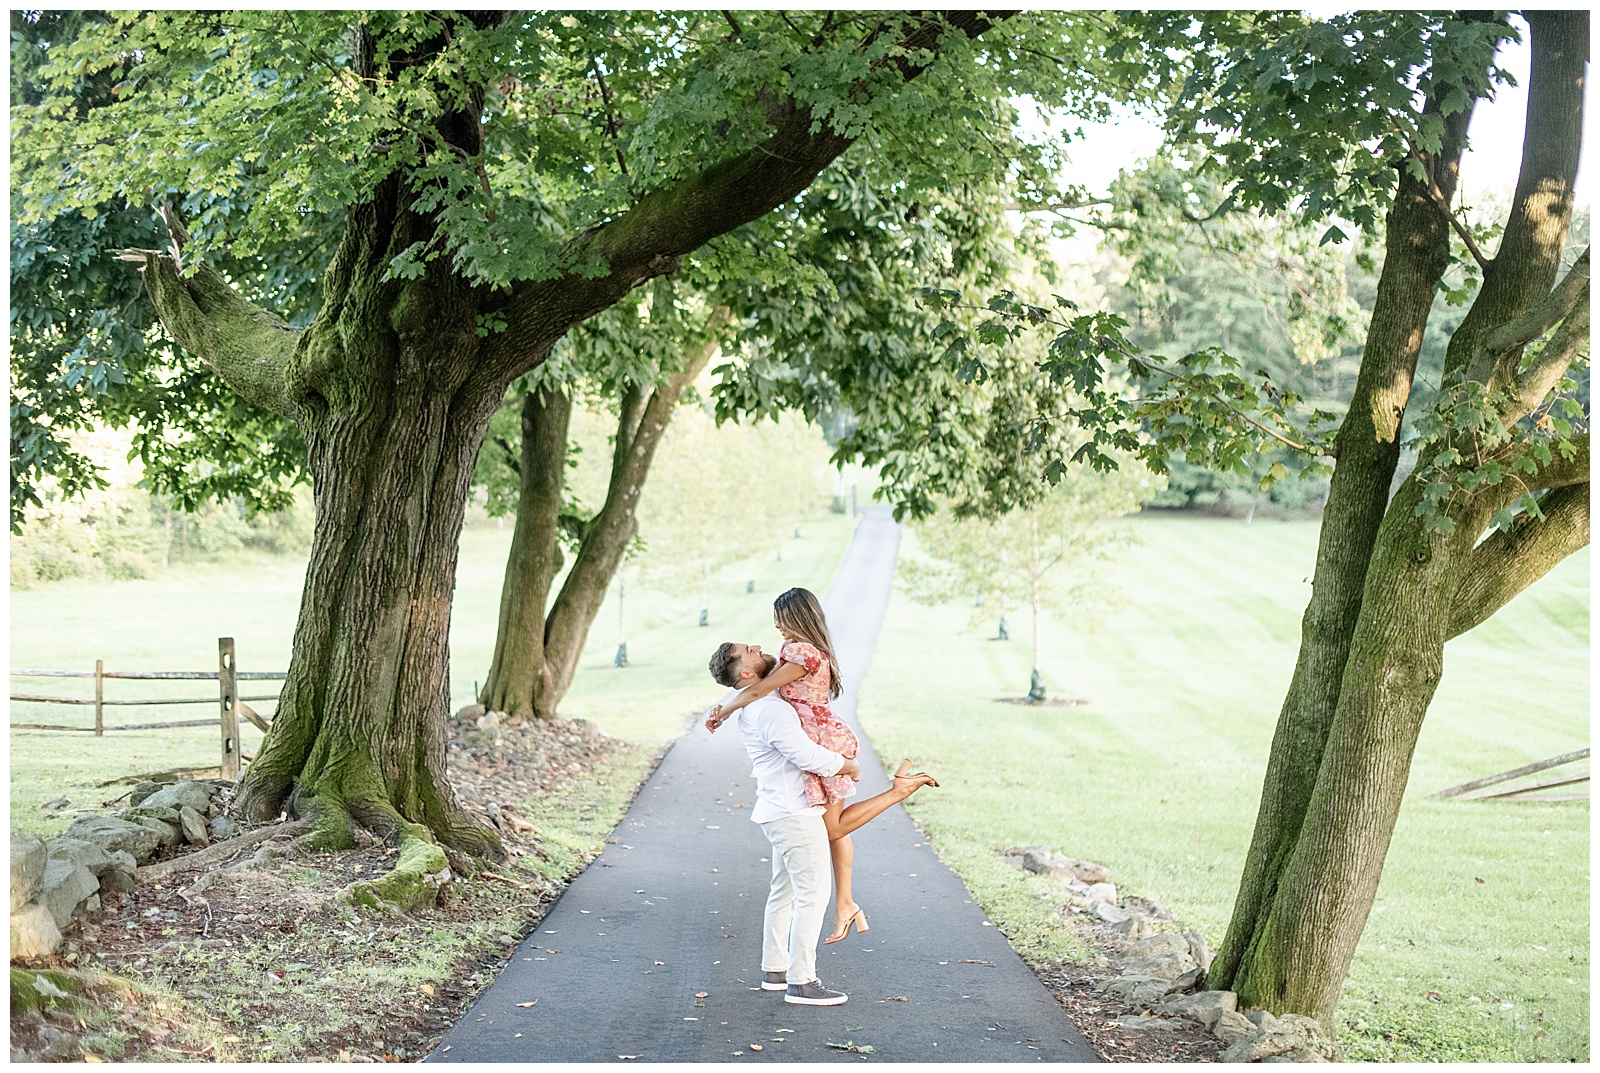 guy lifting up girl as they both look at each other on paved tree-lined path at Domaine Pterion